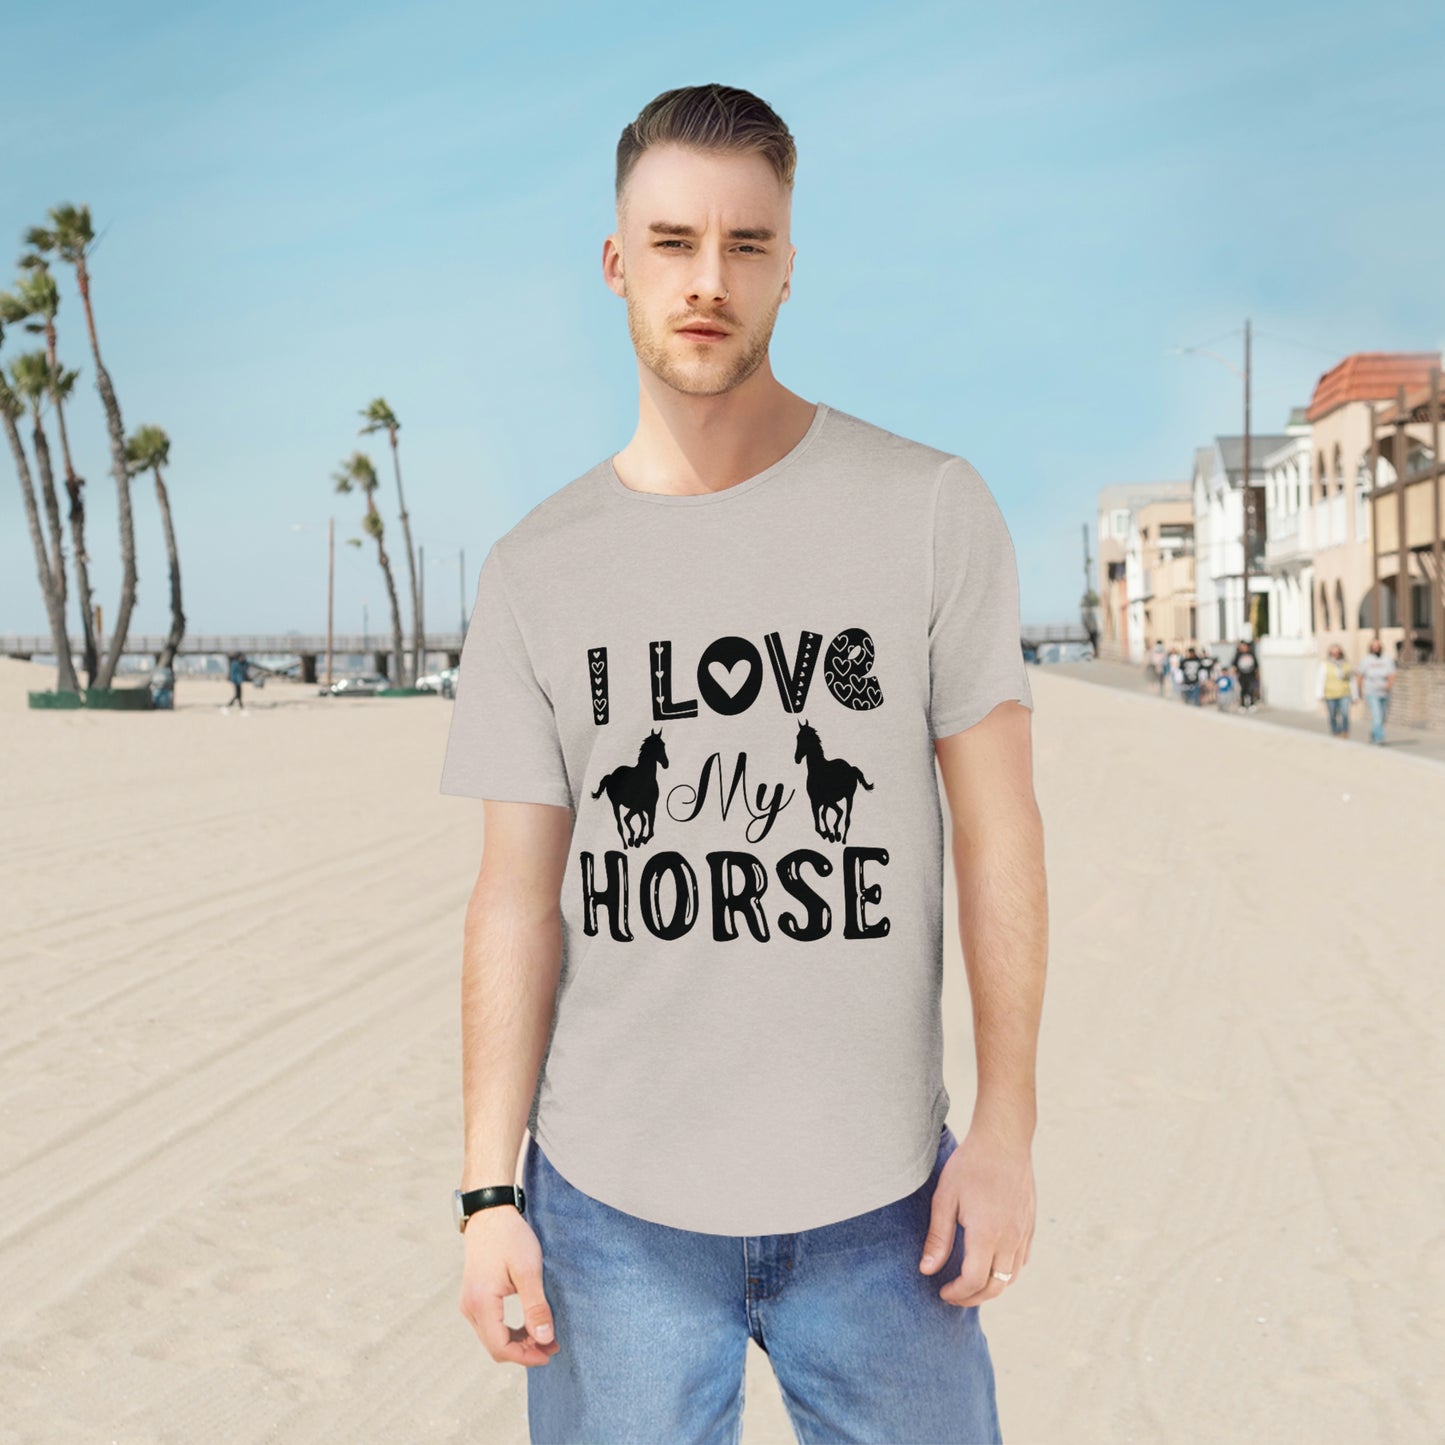 A  comfortable Shirt Show Your Love for Horses with Our Men's Jersey Curved Hem Tee - Perfect for Women and Adults